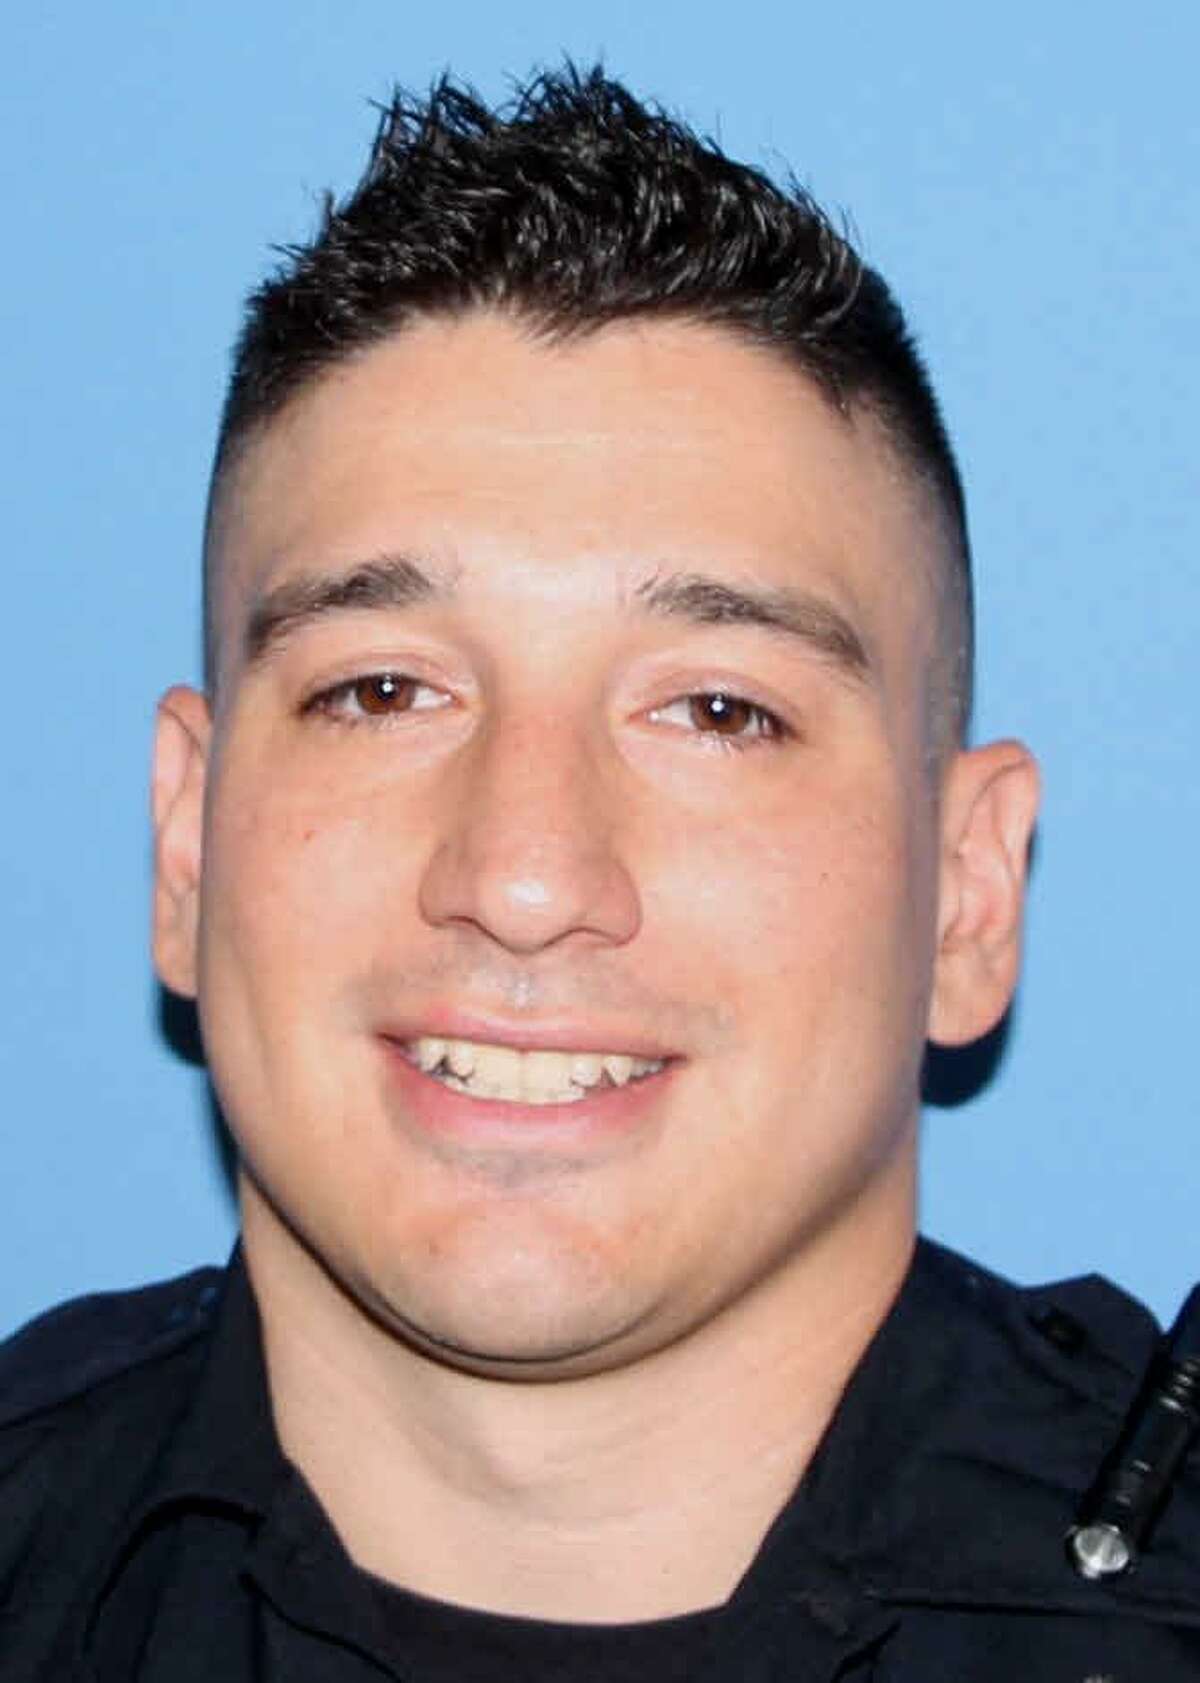 San Antonio Police Officer Michael Brewer was fired June 30, 2020, after police say he placed his left knee on a suspect’s head and neck, even though the man was handcuffed and appeared not to resist.